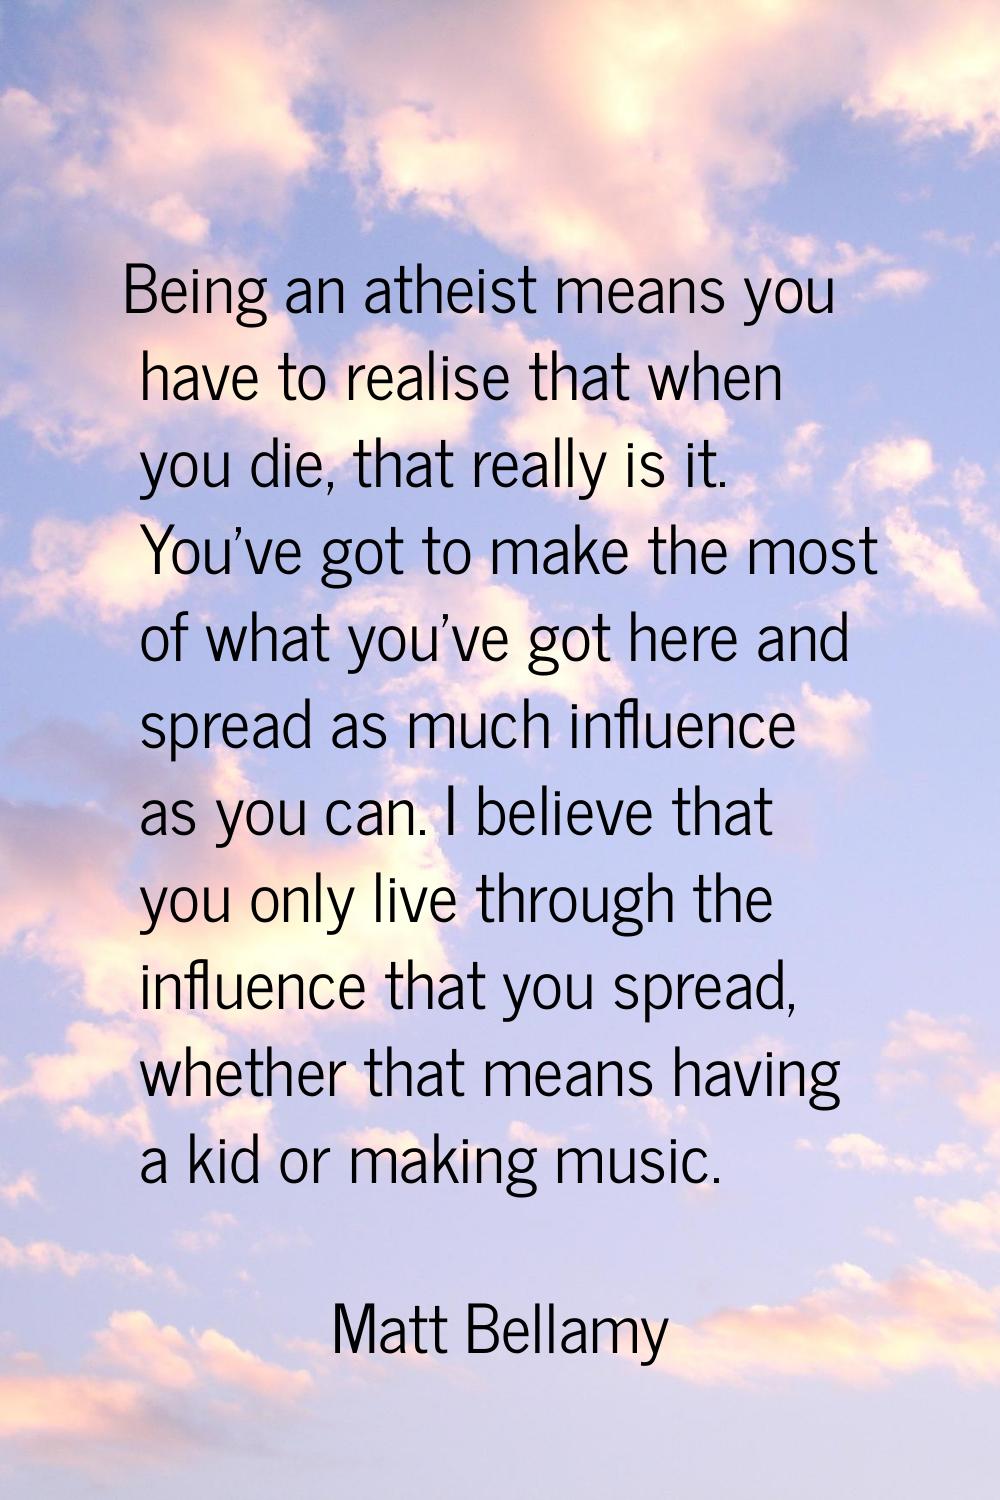 Being an atheist means you have to realise that when you die, that really is it. You've got to make